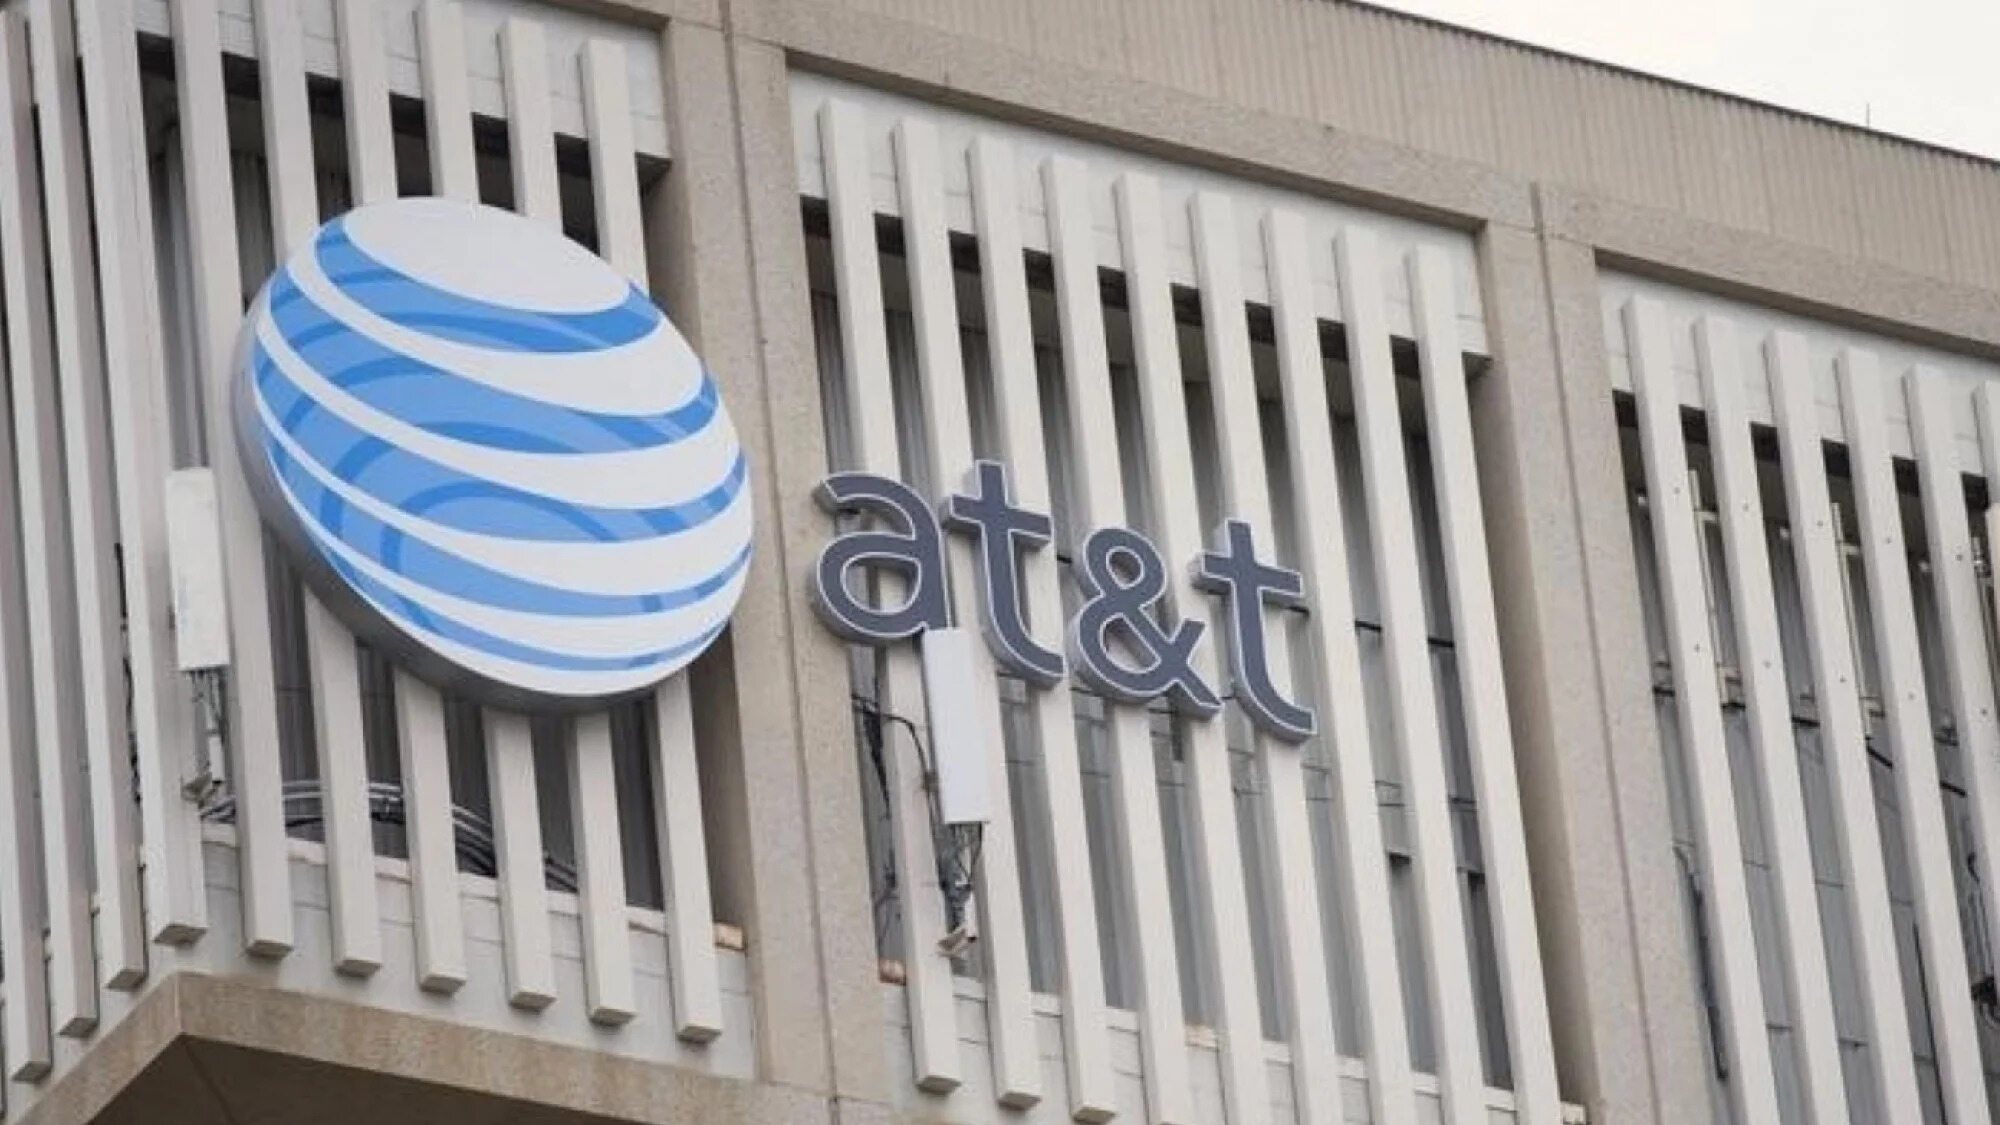 att-brings-back-unlimited-data-with-directv-deal